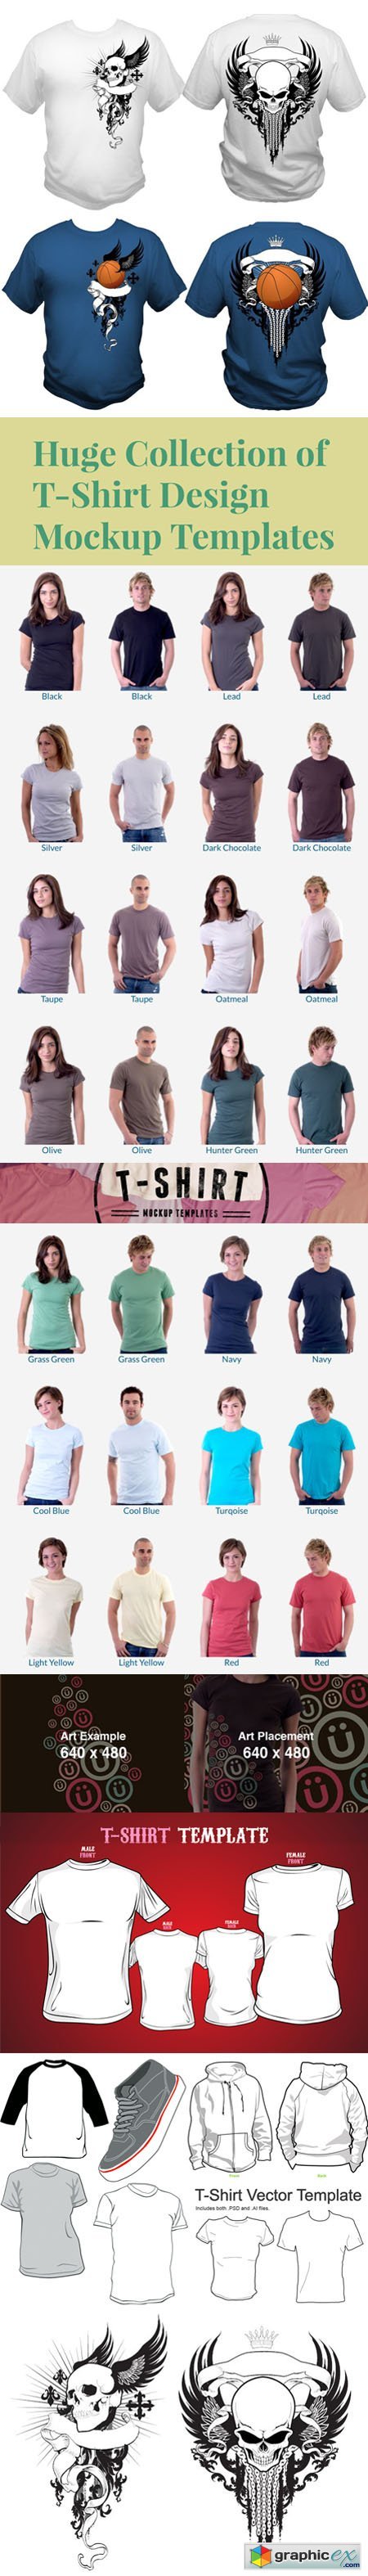 Download Huge Collection of T-Shirt Design Mockup Templates (PSD/AI ...